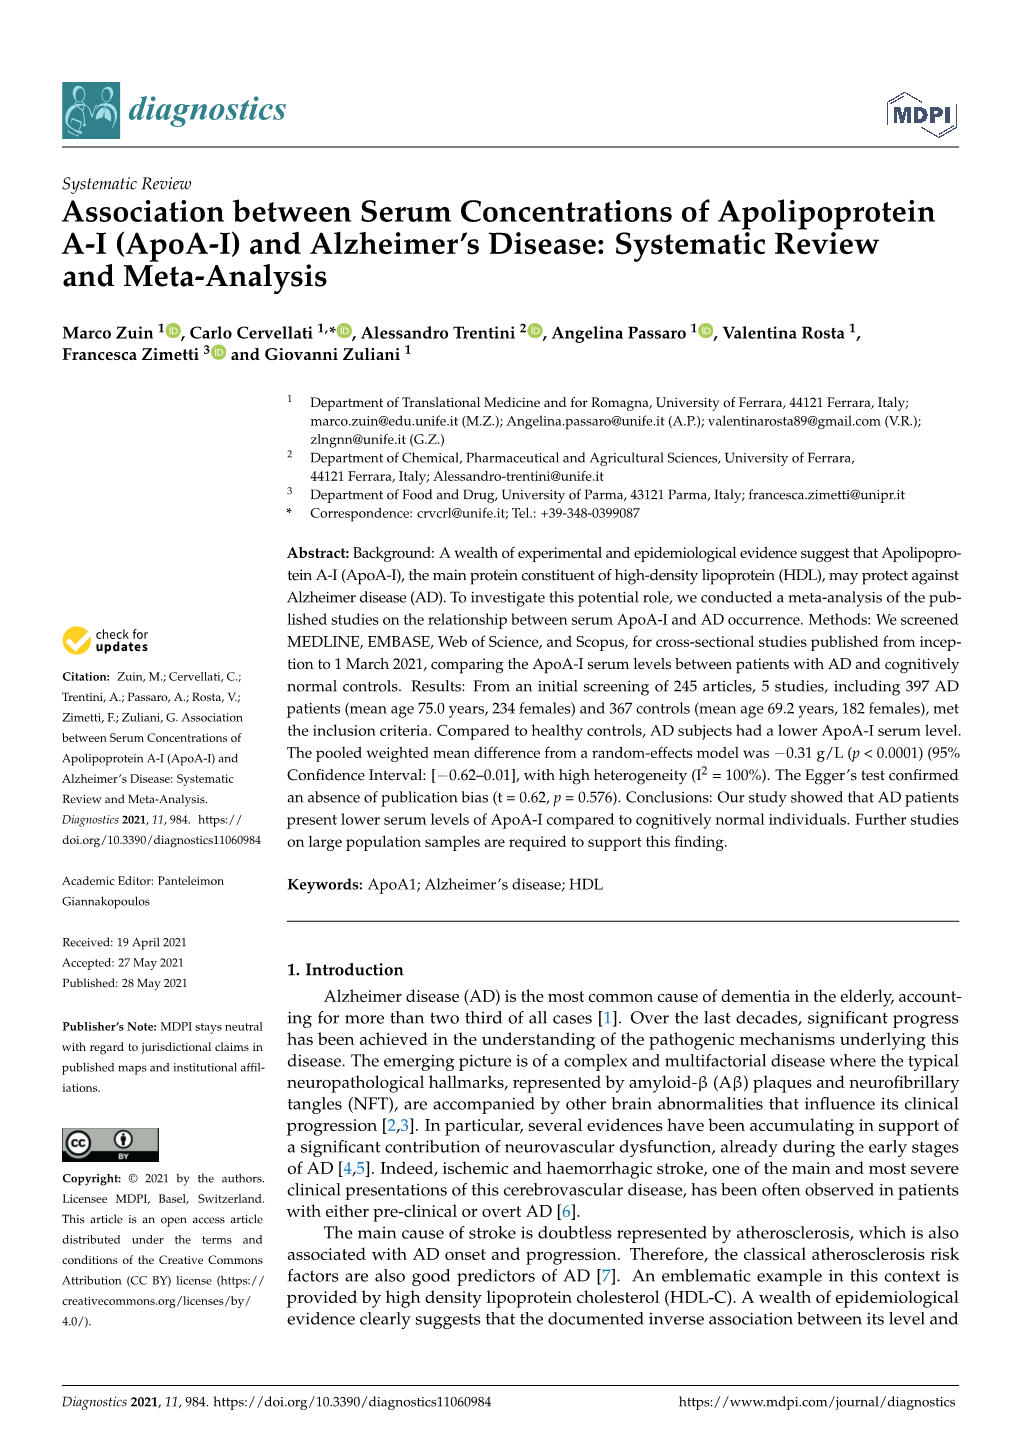 Association Between Serum Concentrations of Apolipoprotein A-I (Apoa-I) and Alzheimer's Disease: Systematic Review and Meta-An